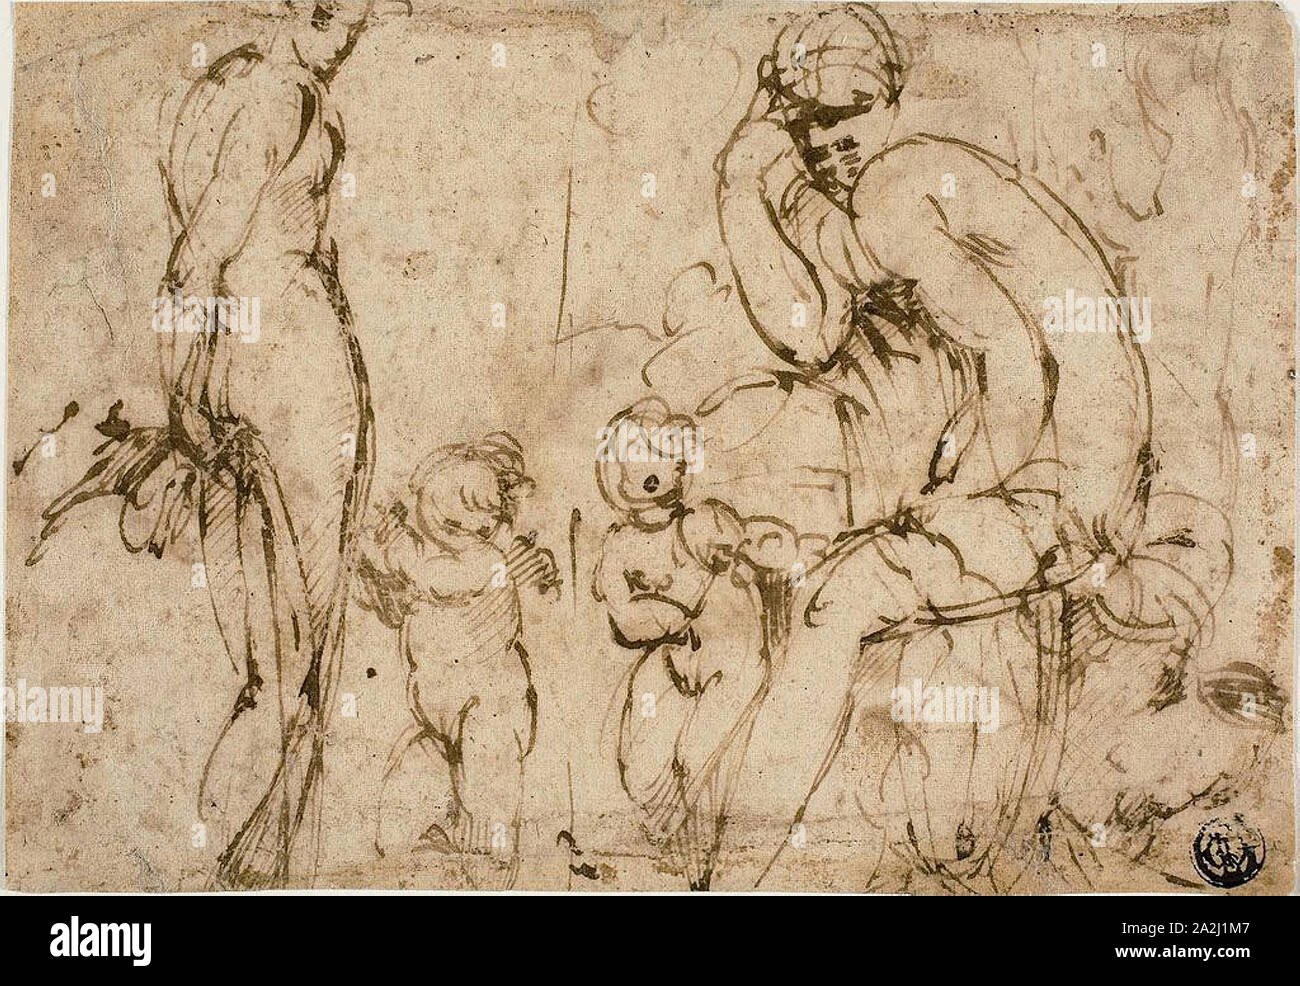 Venus and Mars with Putti (recto), Bearded Man Moving to Right (verso), c. 1550, Circle of Francesco Mazzola, called Parmigianino, Italian, 1503-1540, Italy, Pen and brown ink on cream laid paper (recto and verso), both laid down on ivory laid paper, 122 x 175 mm Stock Photo